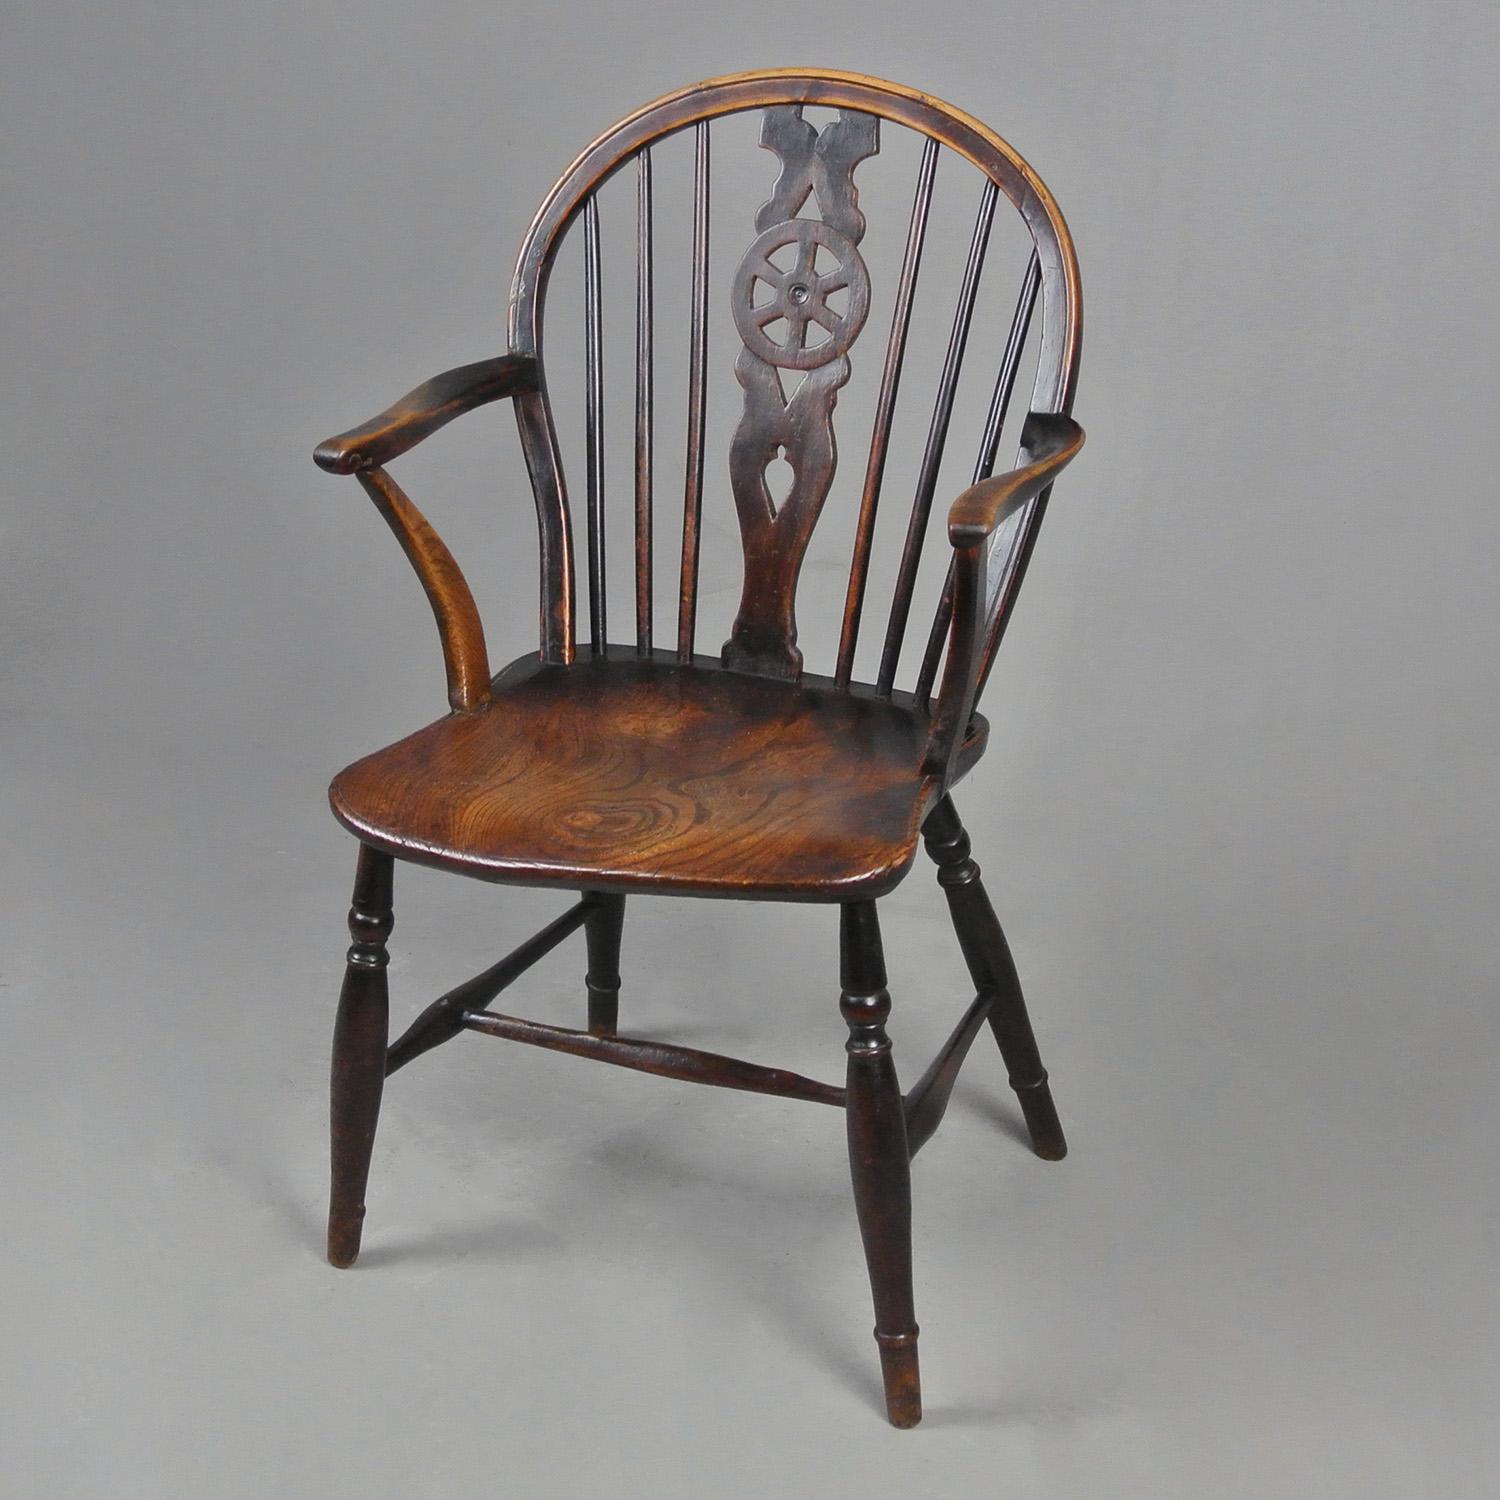 19th Century Early Thames Valley Windsor Wheel Back Chair c. 1800 For Sale